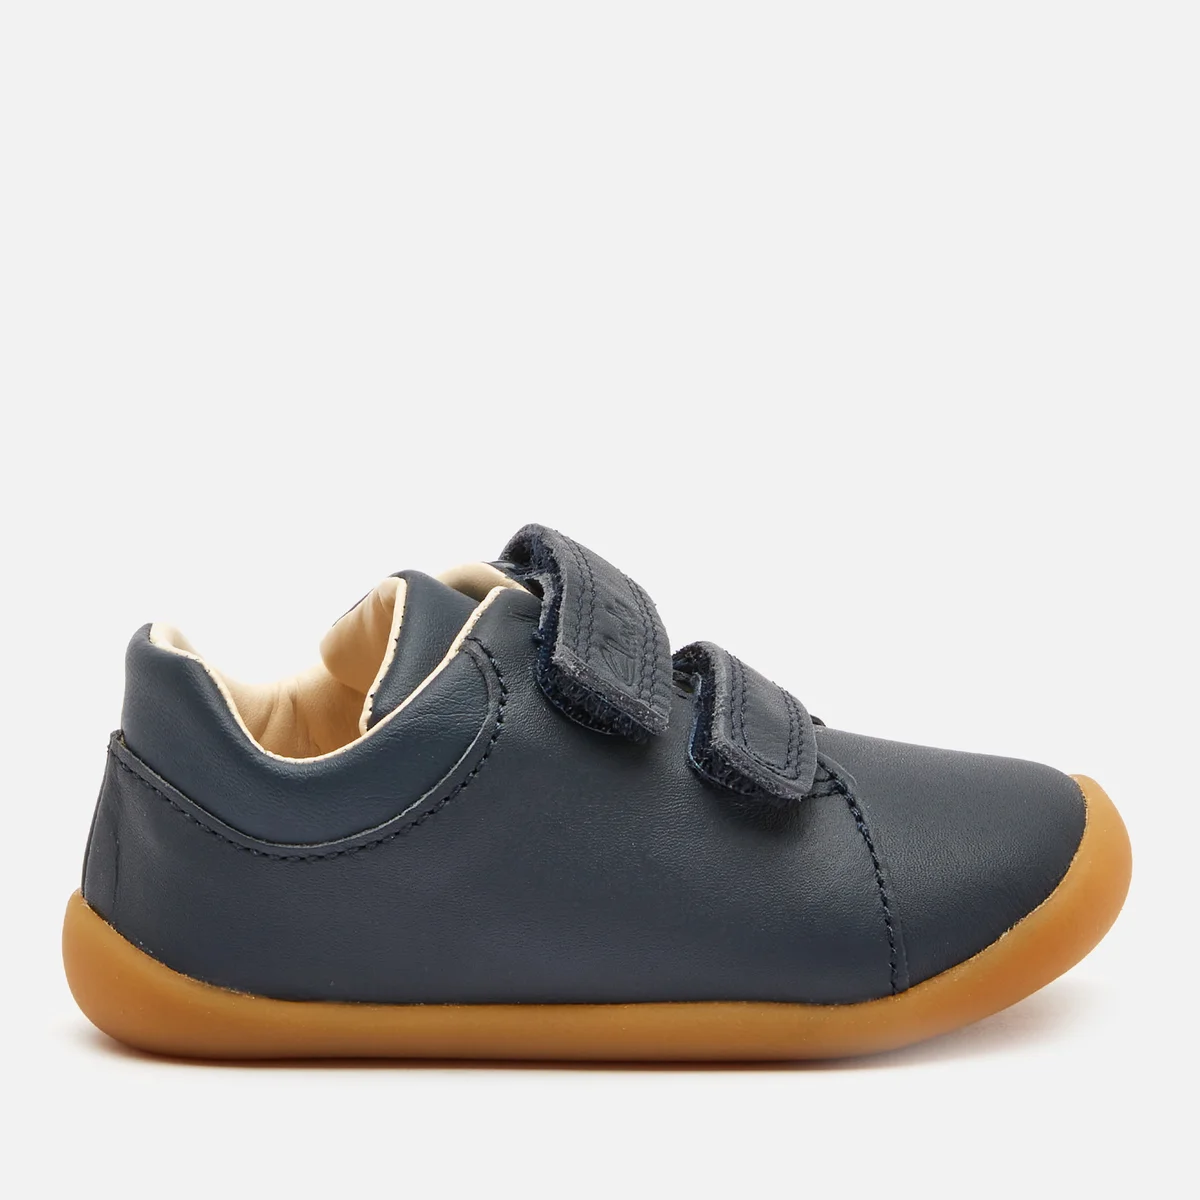 Clarks Toddlers Roamer Craft Shoes - Navy Leather Image 1